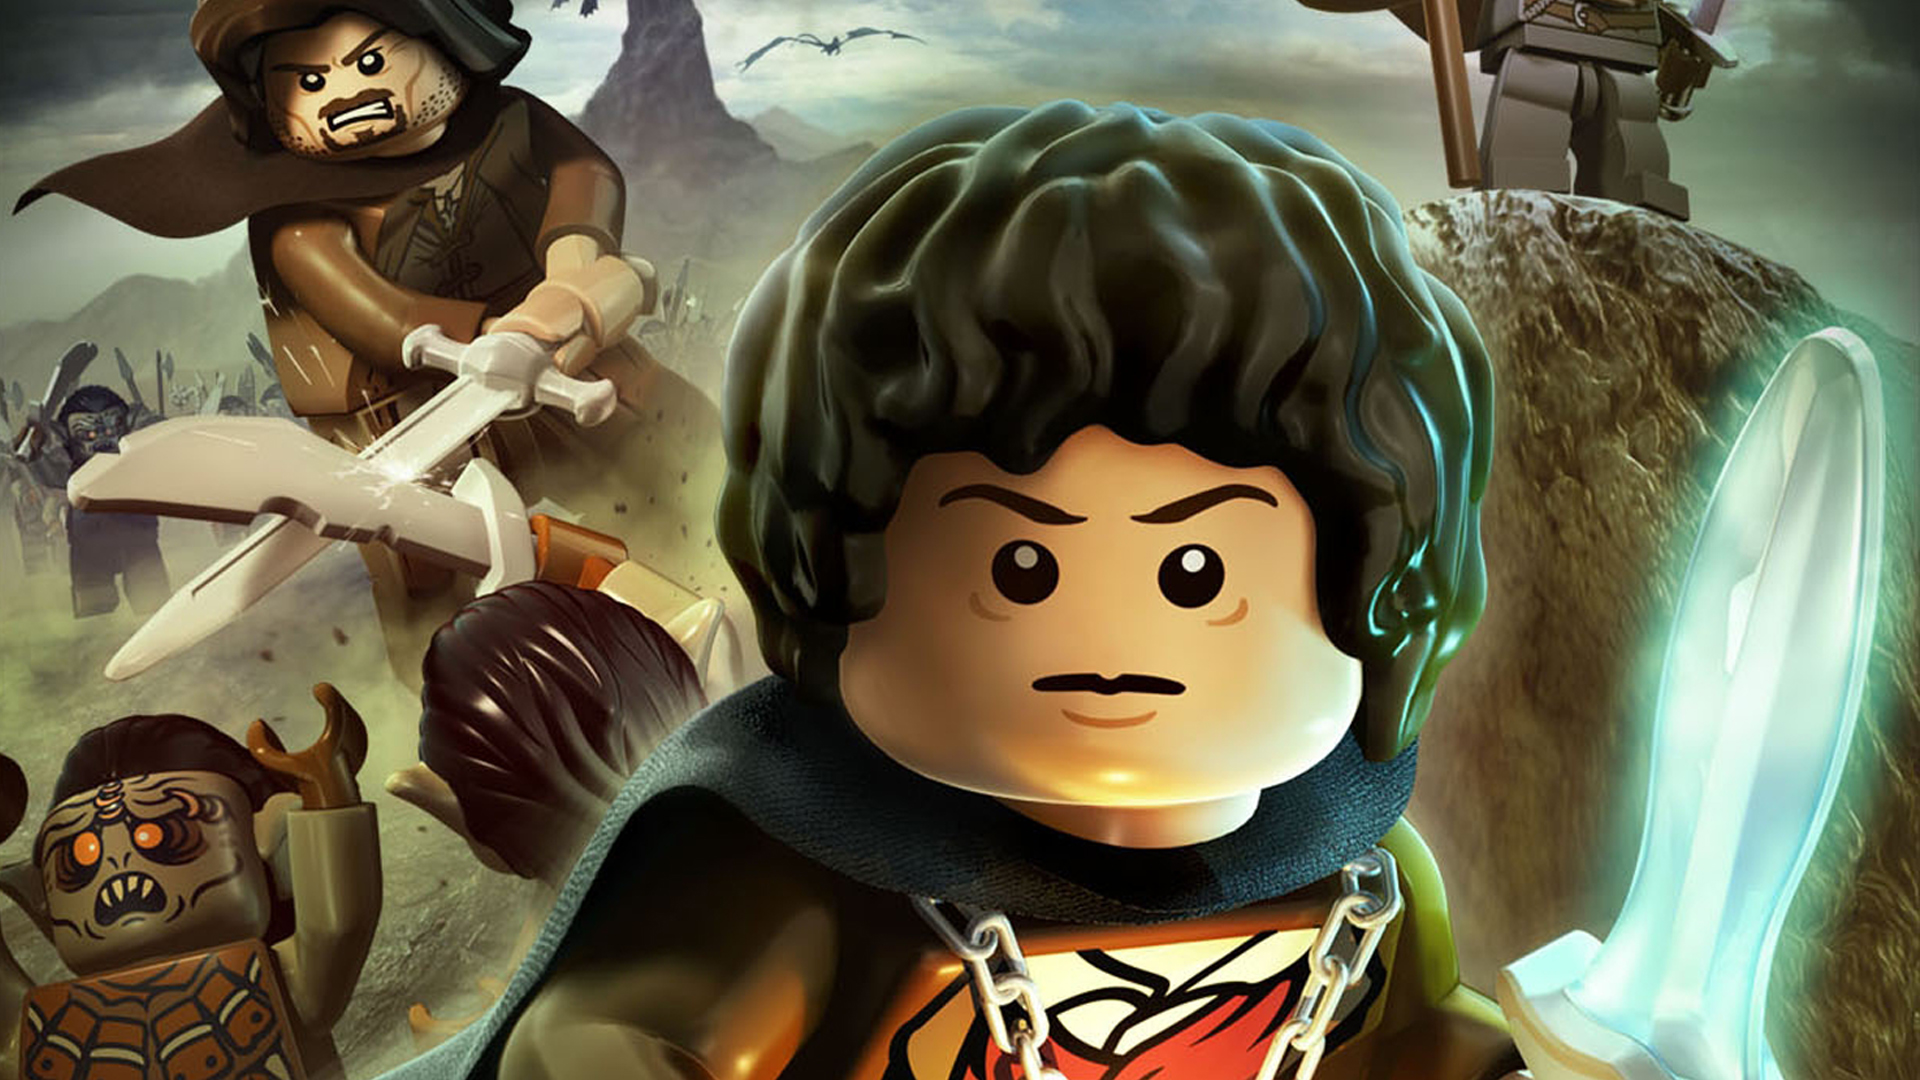 Video Game LEGO The Lord of the Rings HD Wallpaper | Background Image